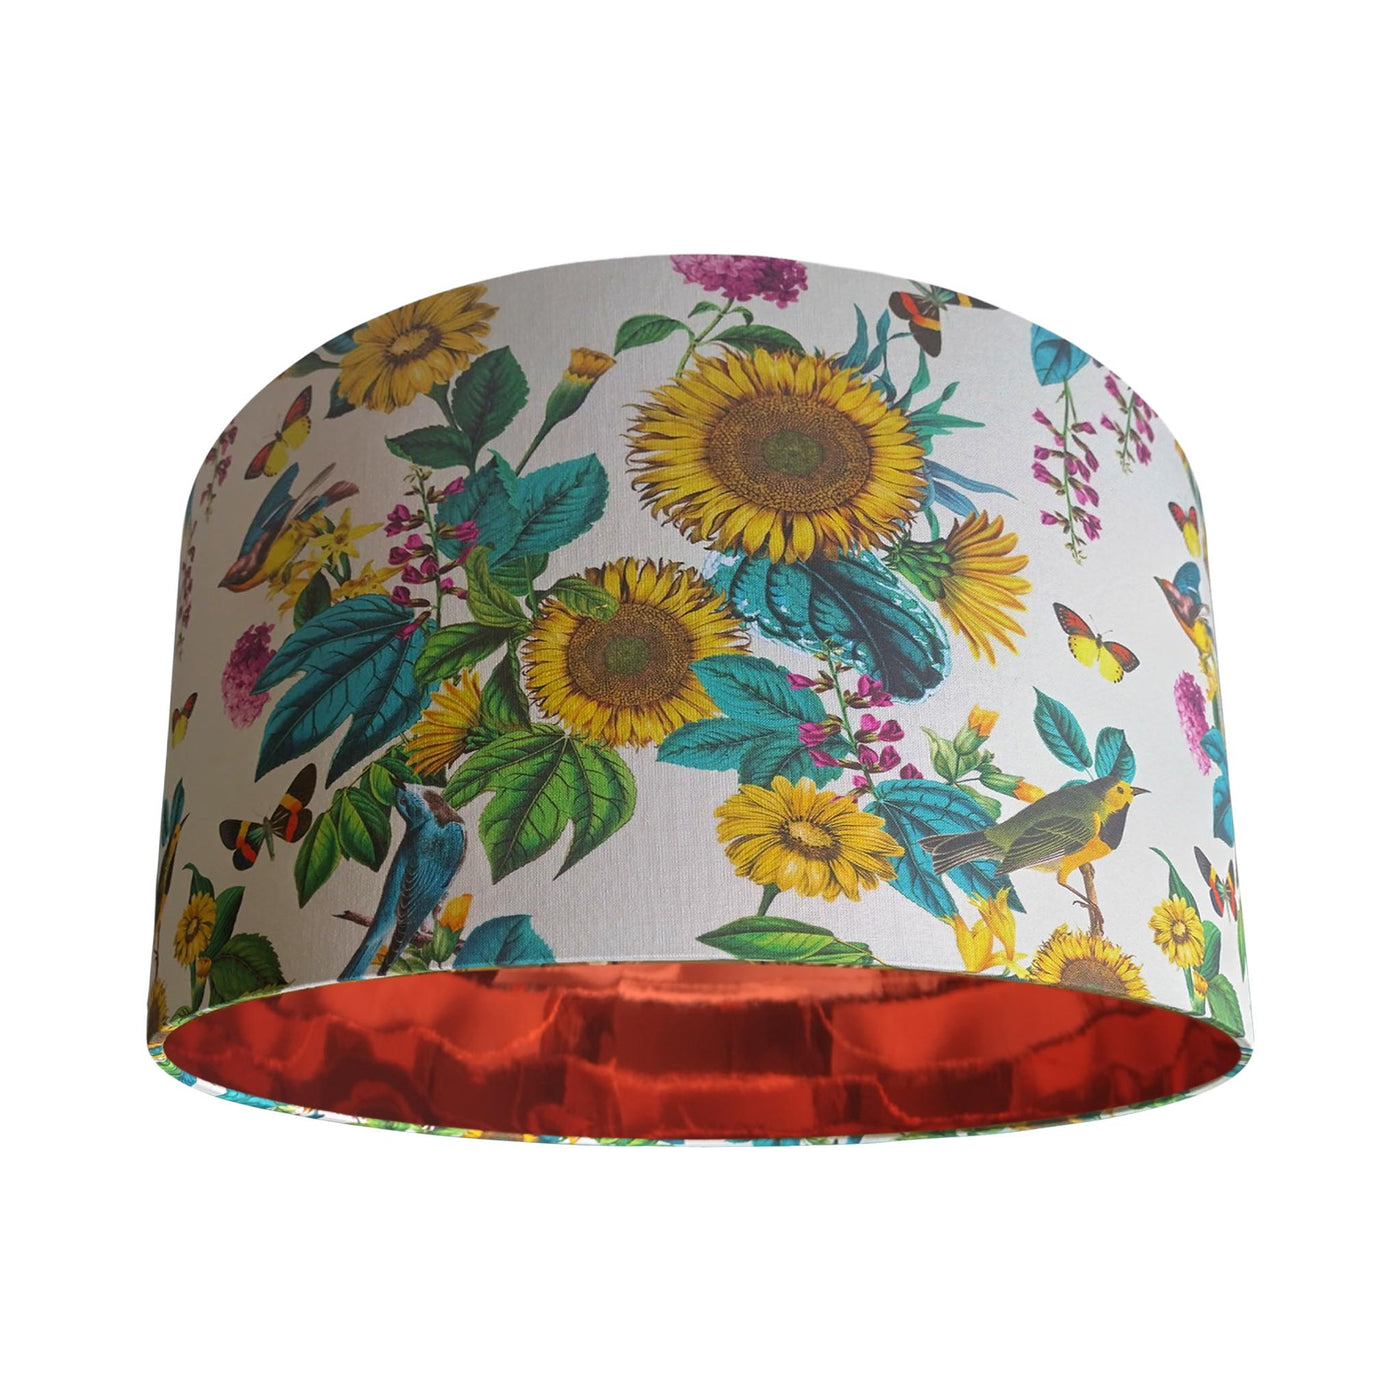 Copper Lined Lampshade with Birds and Sunflowers in Cream